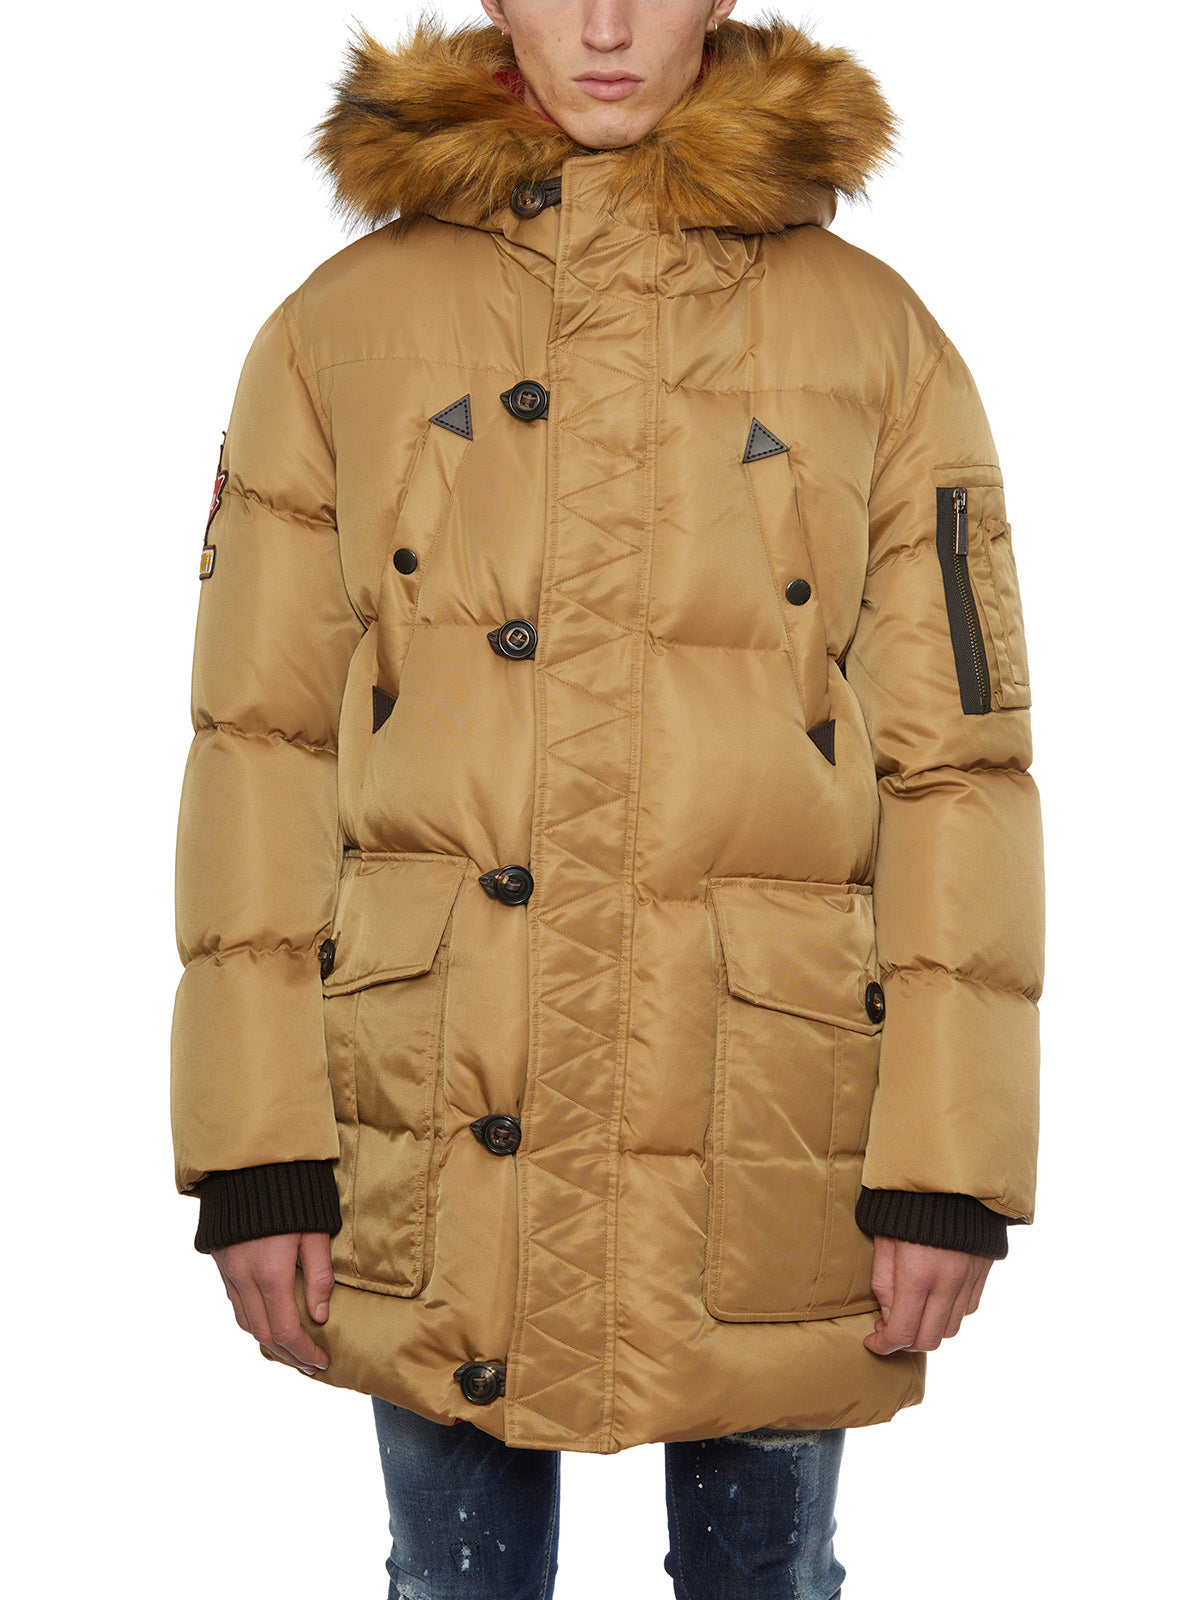 DSQUARED2 Beige Puffer Jacket with Hood for Men